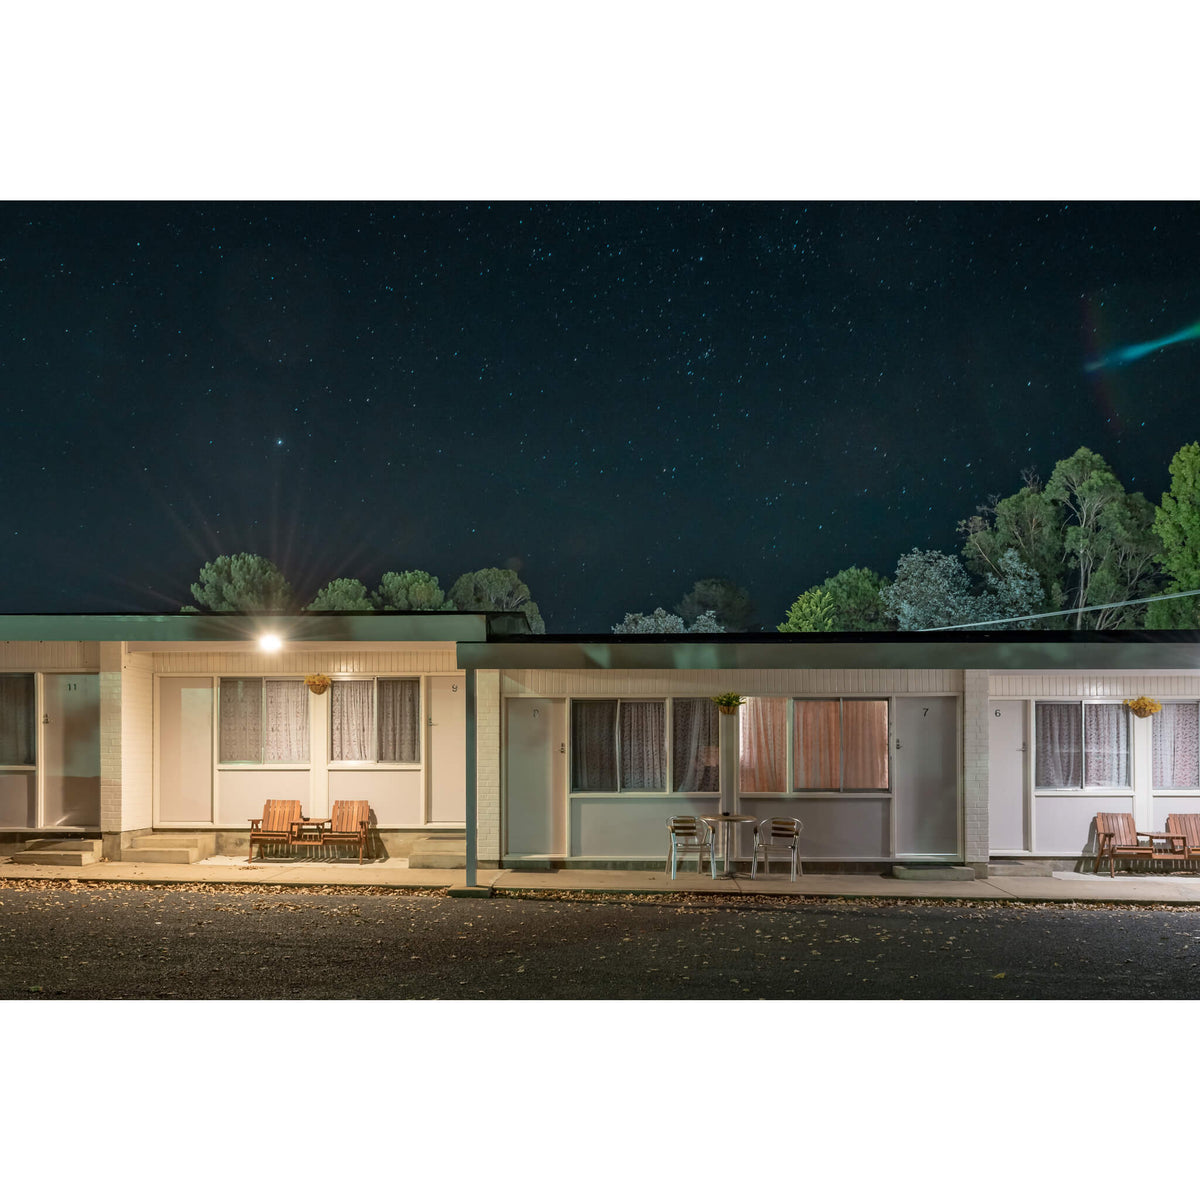 Lithgow Valley Motel, Bowenfels | Hotel Motel 101 Fine Art Print - Lost Collective Shop